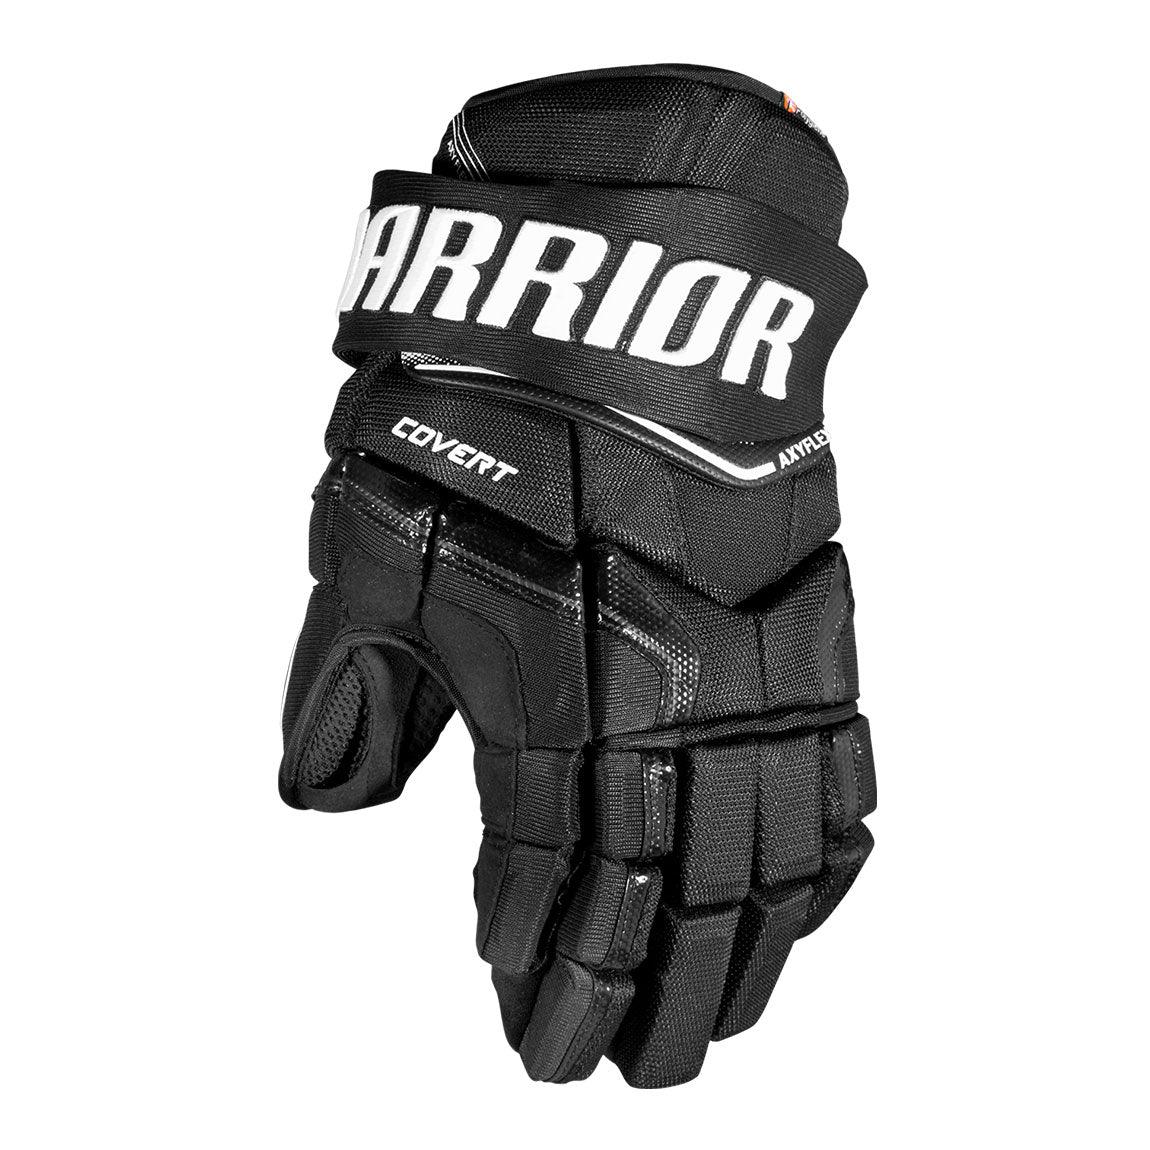 Covert QRE Hockey Glove - Youth - Sports Excellence